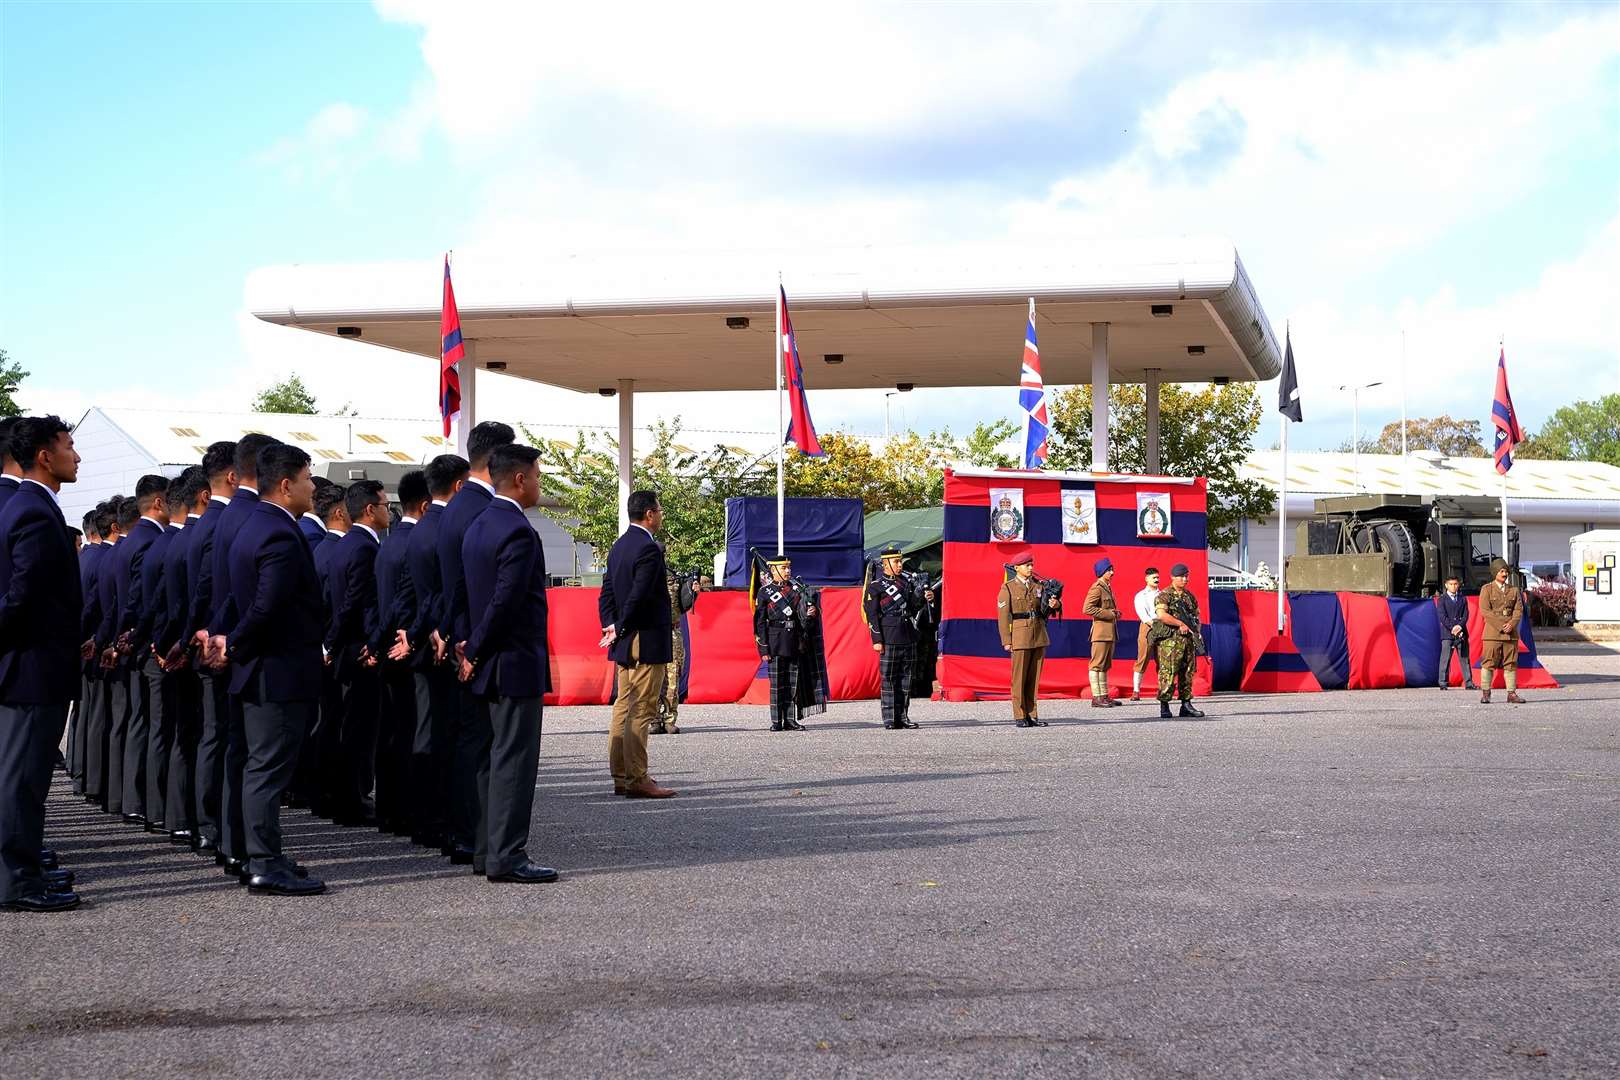 The Queen’s Gurkha Engineers celebrating 75 years in Maidstone. Photo: Mick Latter